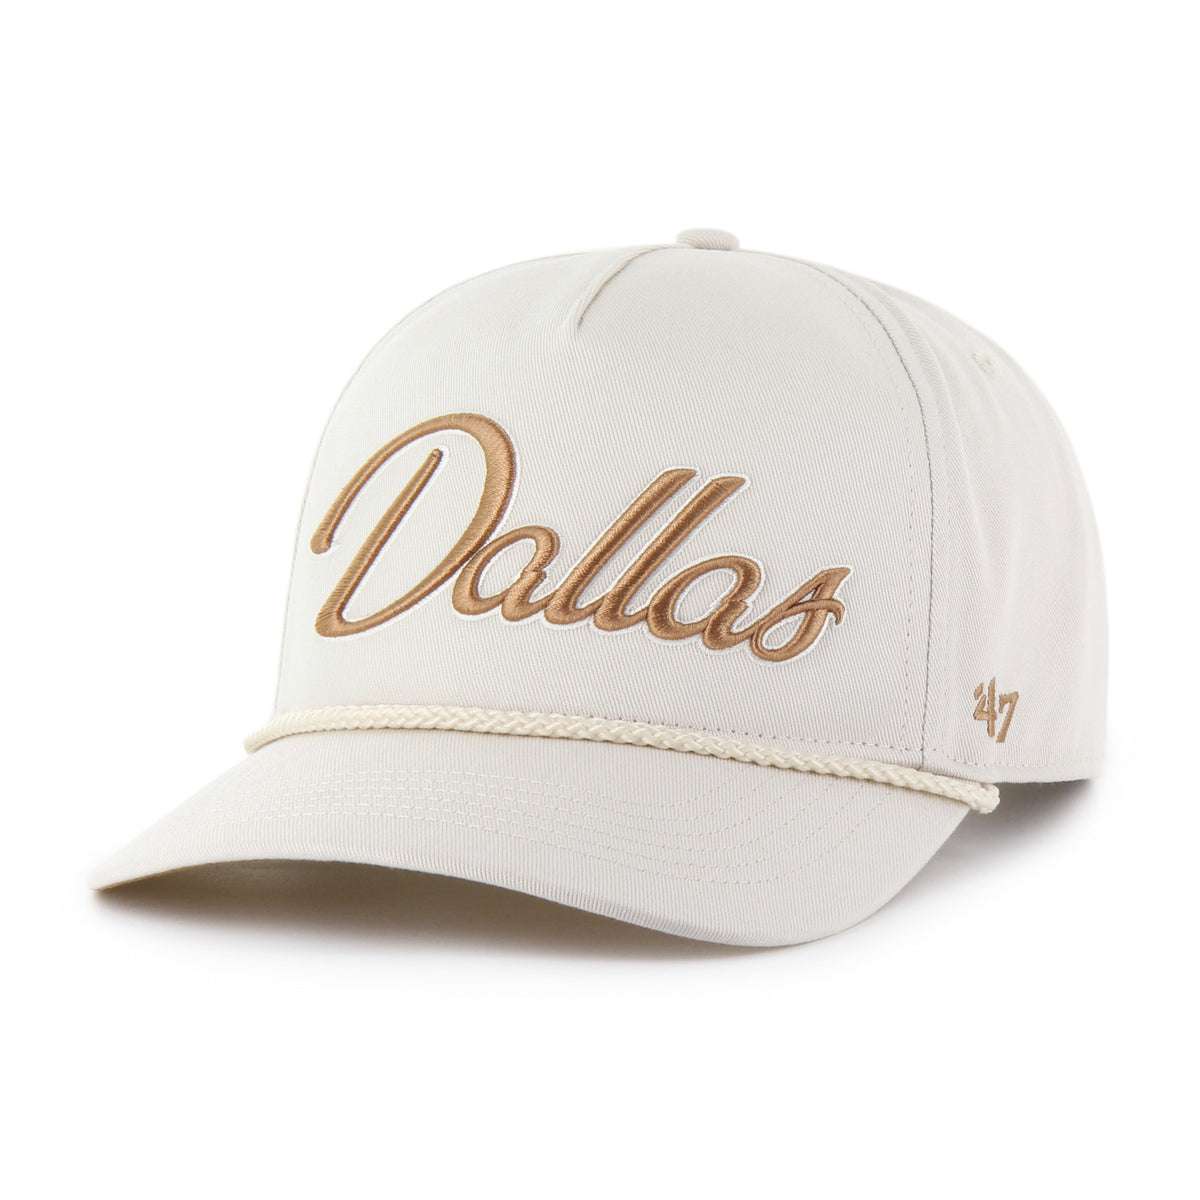 DALLAS COWBOYS OVERHAND ROPE '47 HITCH RELAXED FIT